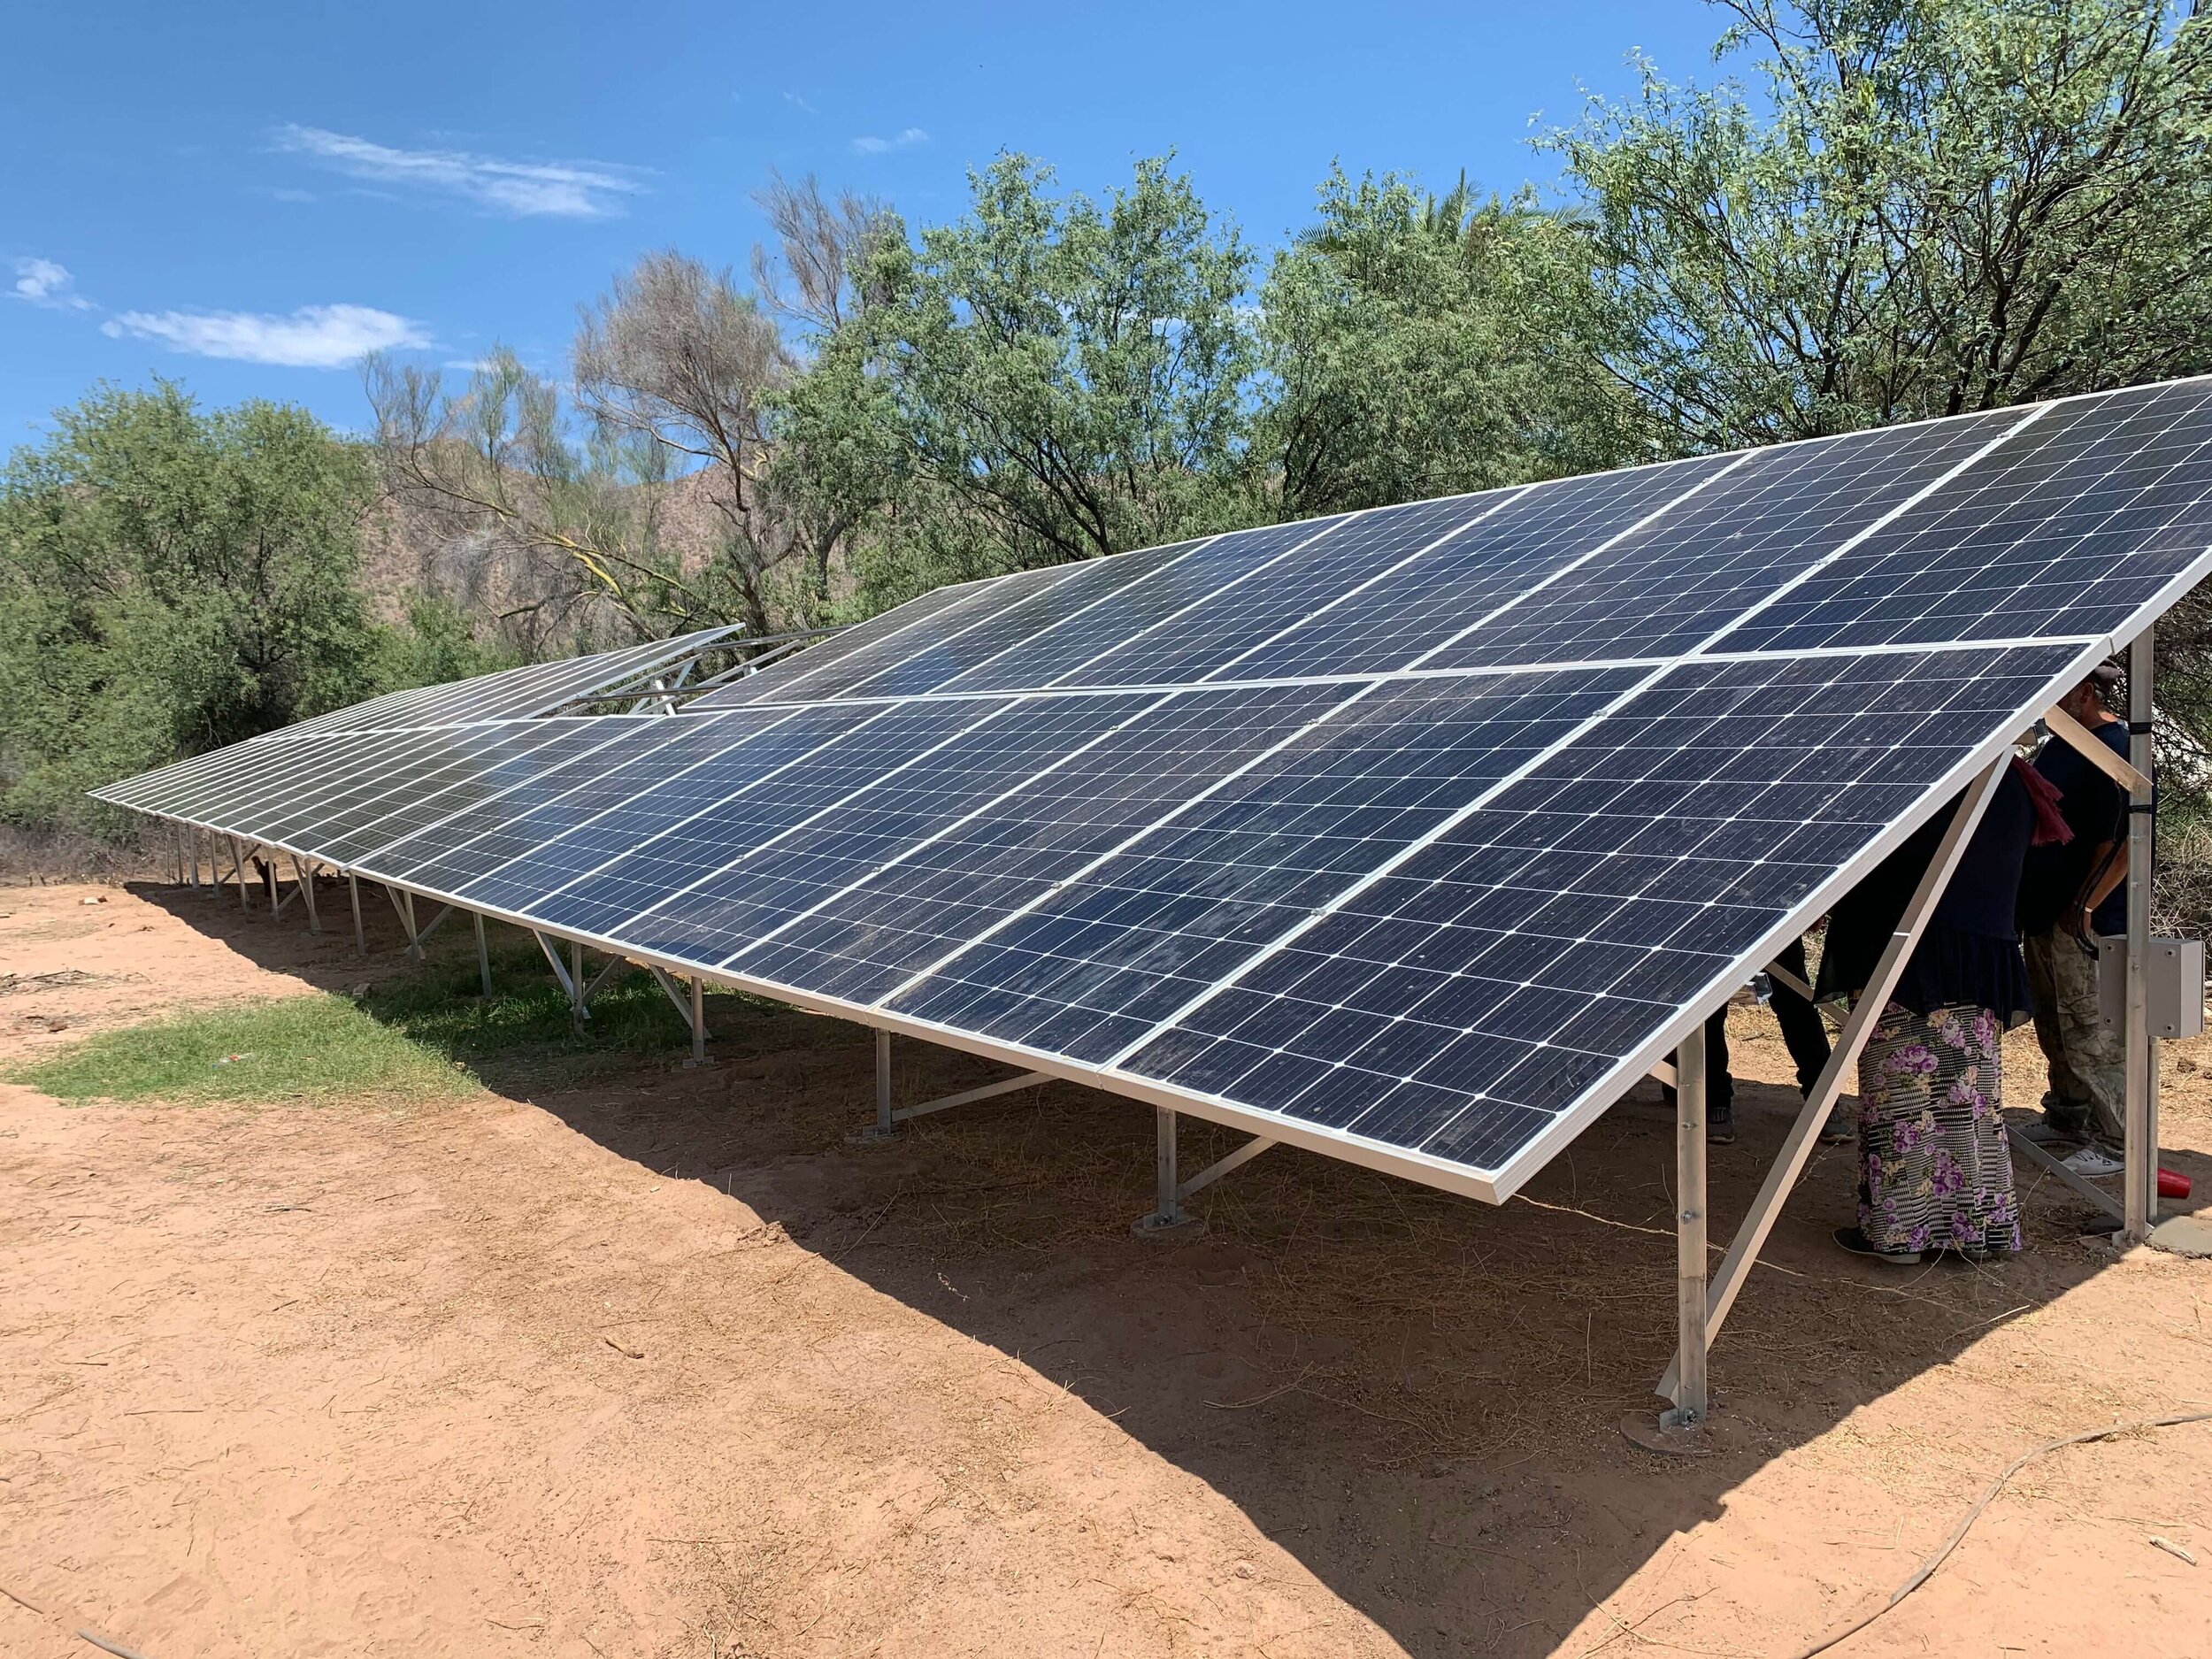  A second angle of the solar panels that will soon power a solar water pumping system for the Seri Indian tribe in Northern Mexico.  Photo by Borderlands Restoration Network   Photo by Borderlands Restoration Network 